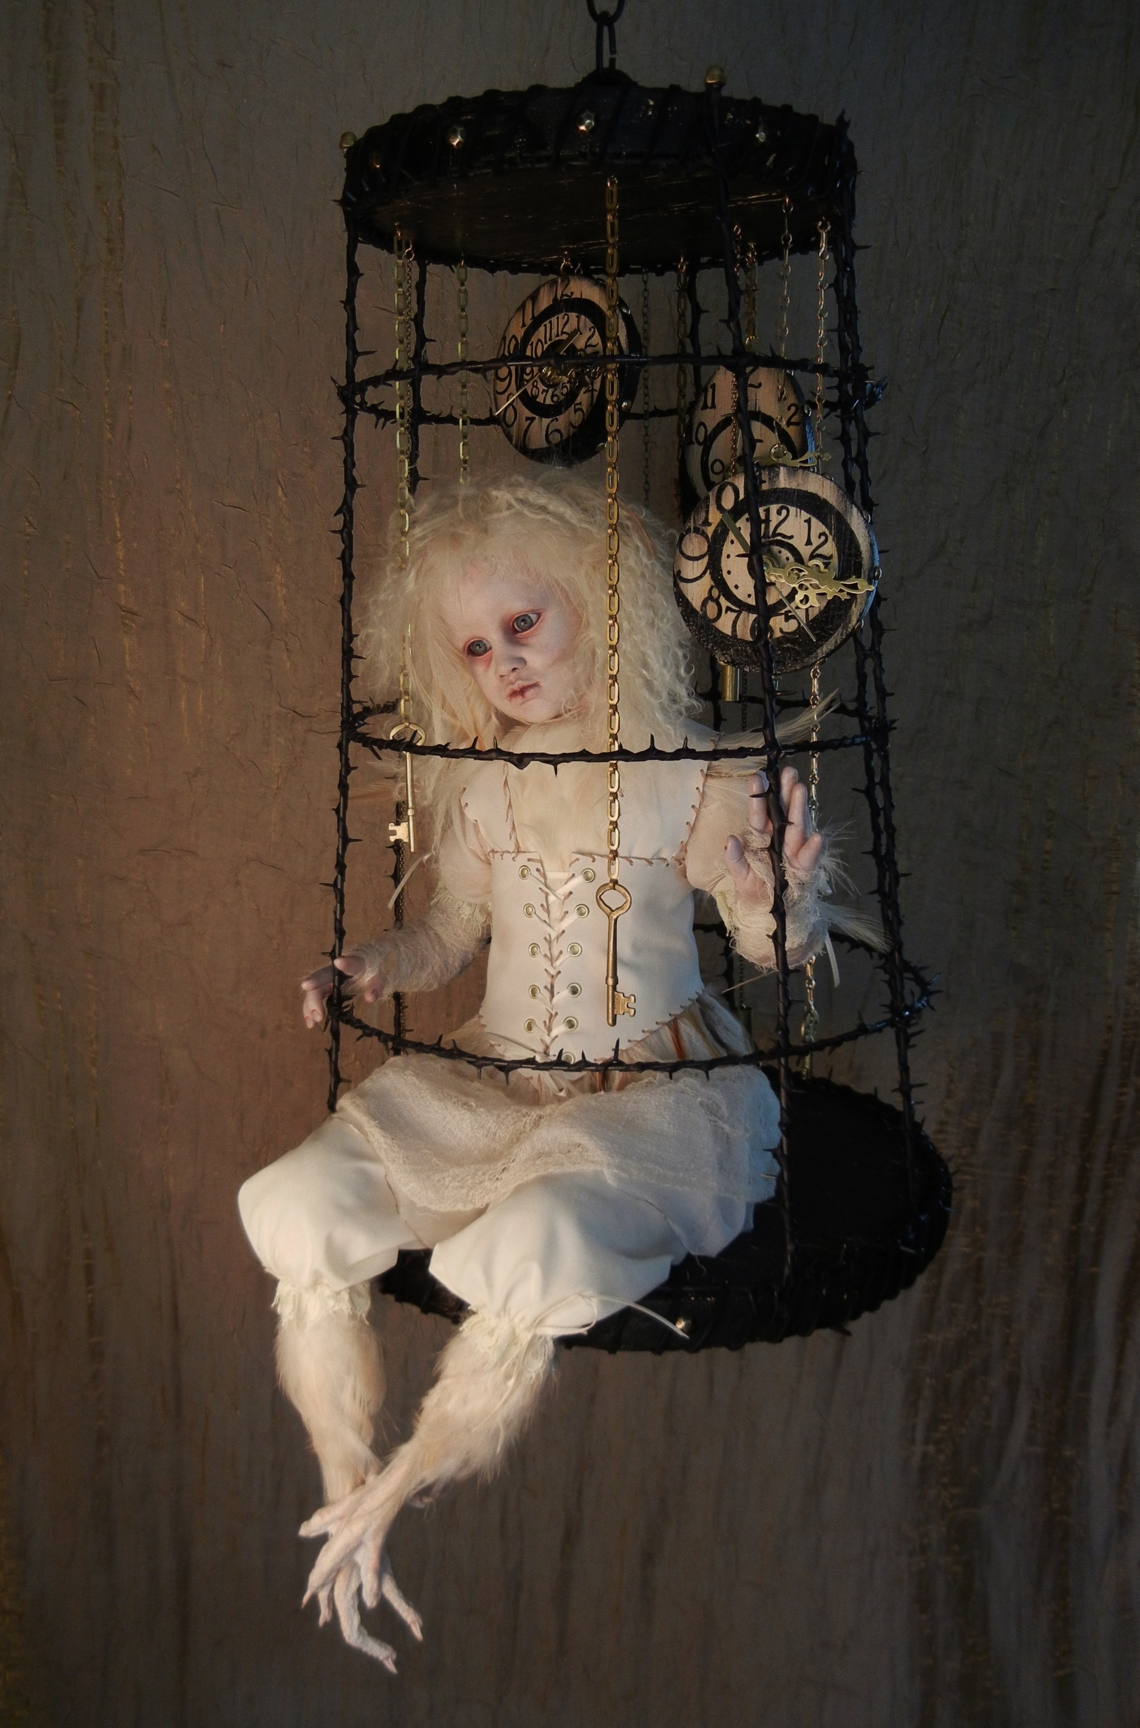 taxidermy artdoll assemblage of a white thornbird doll with feathered feet sitting in a suspended cage surrounded by hand painted clocks